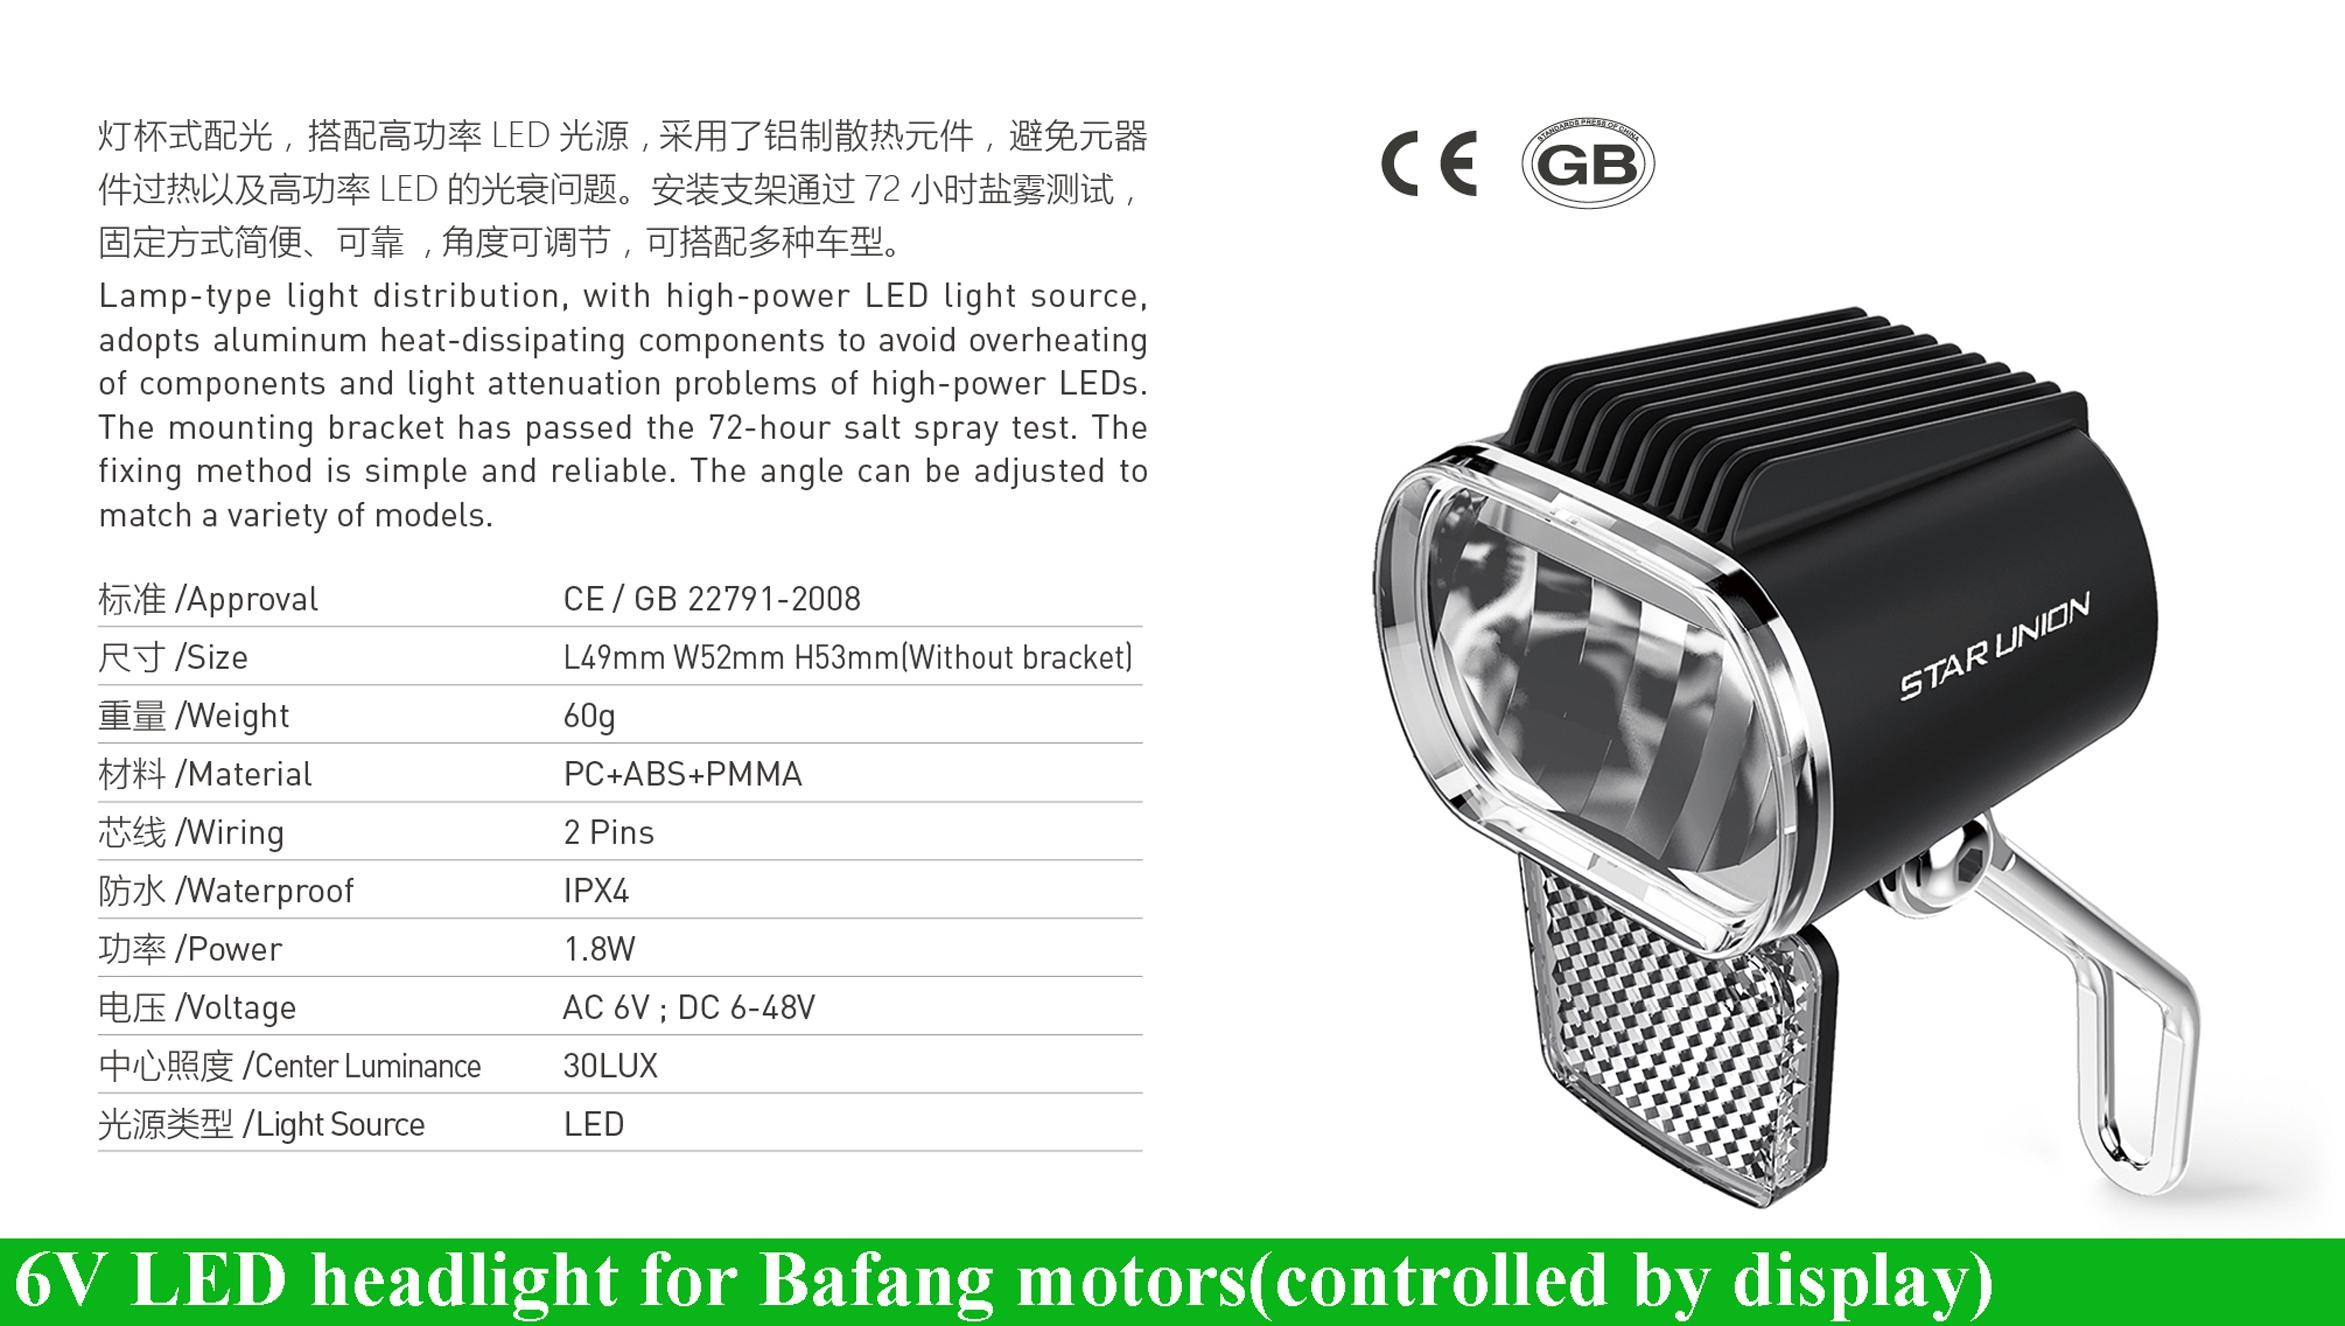 ebike 6V LED headlight for Bafang BBS controlled by display